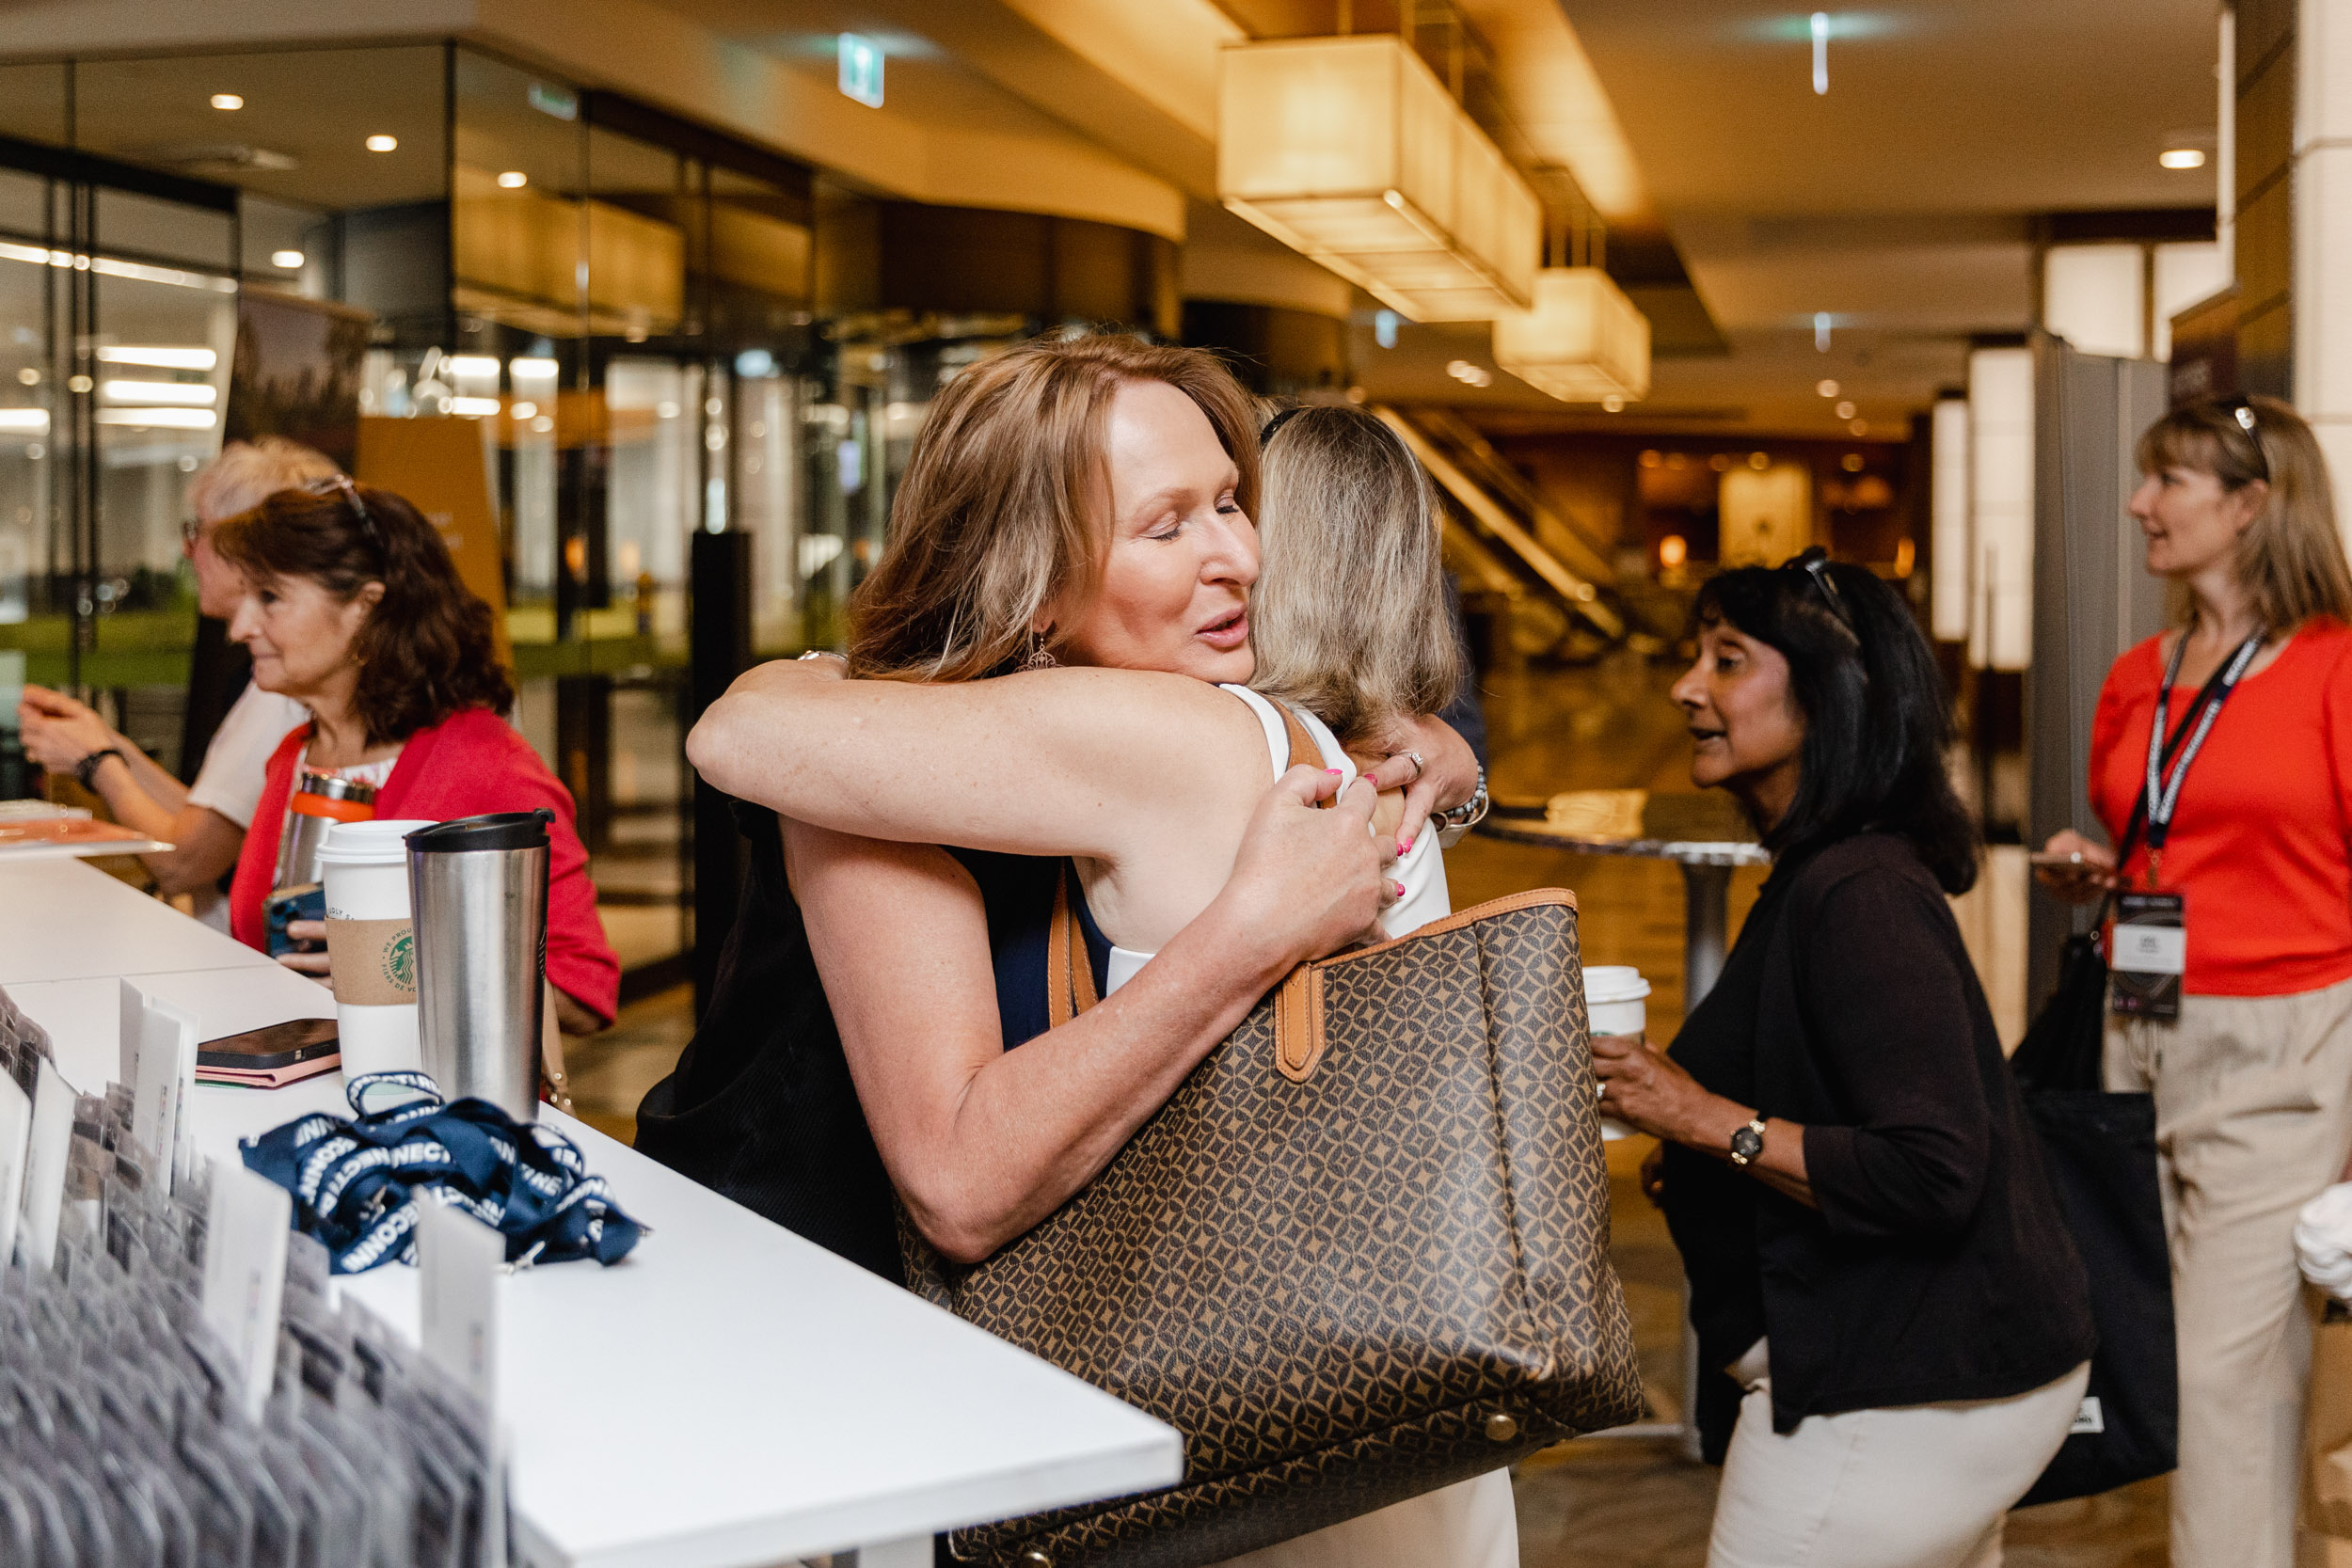 Conference photography: Two women embrace in a lobby.